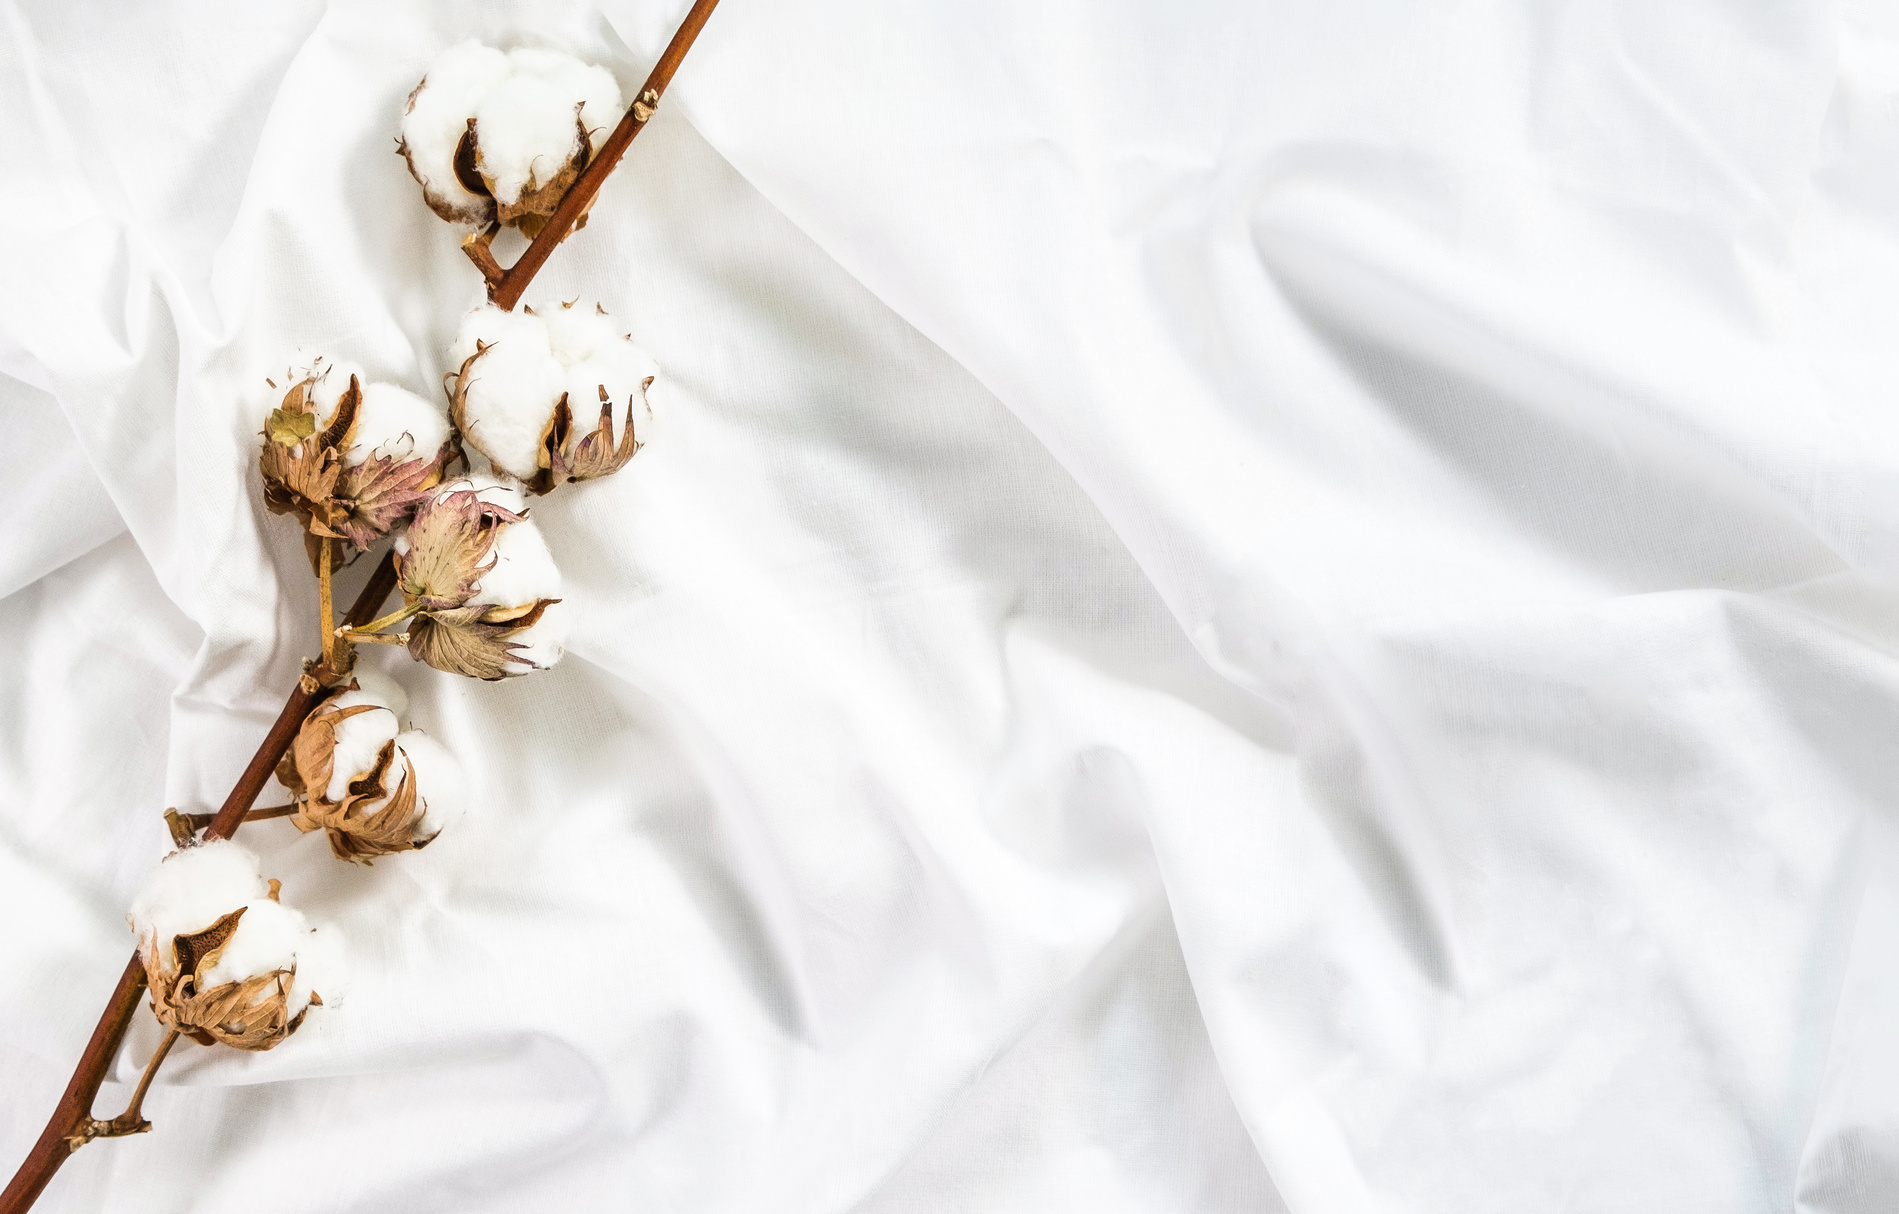 Cotton branch of plant flower on crumpled cotton white fabric. Cotton bed linen